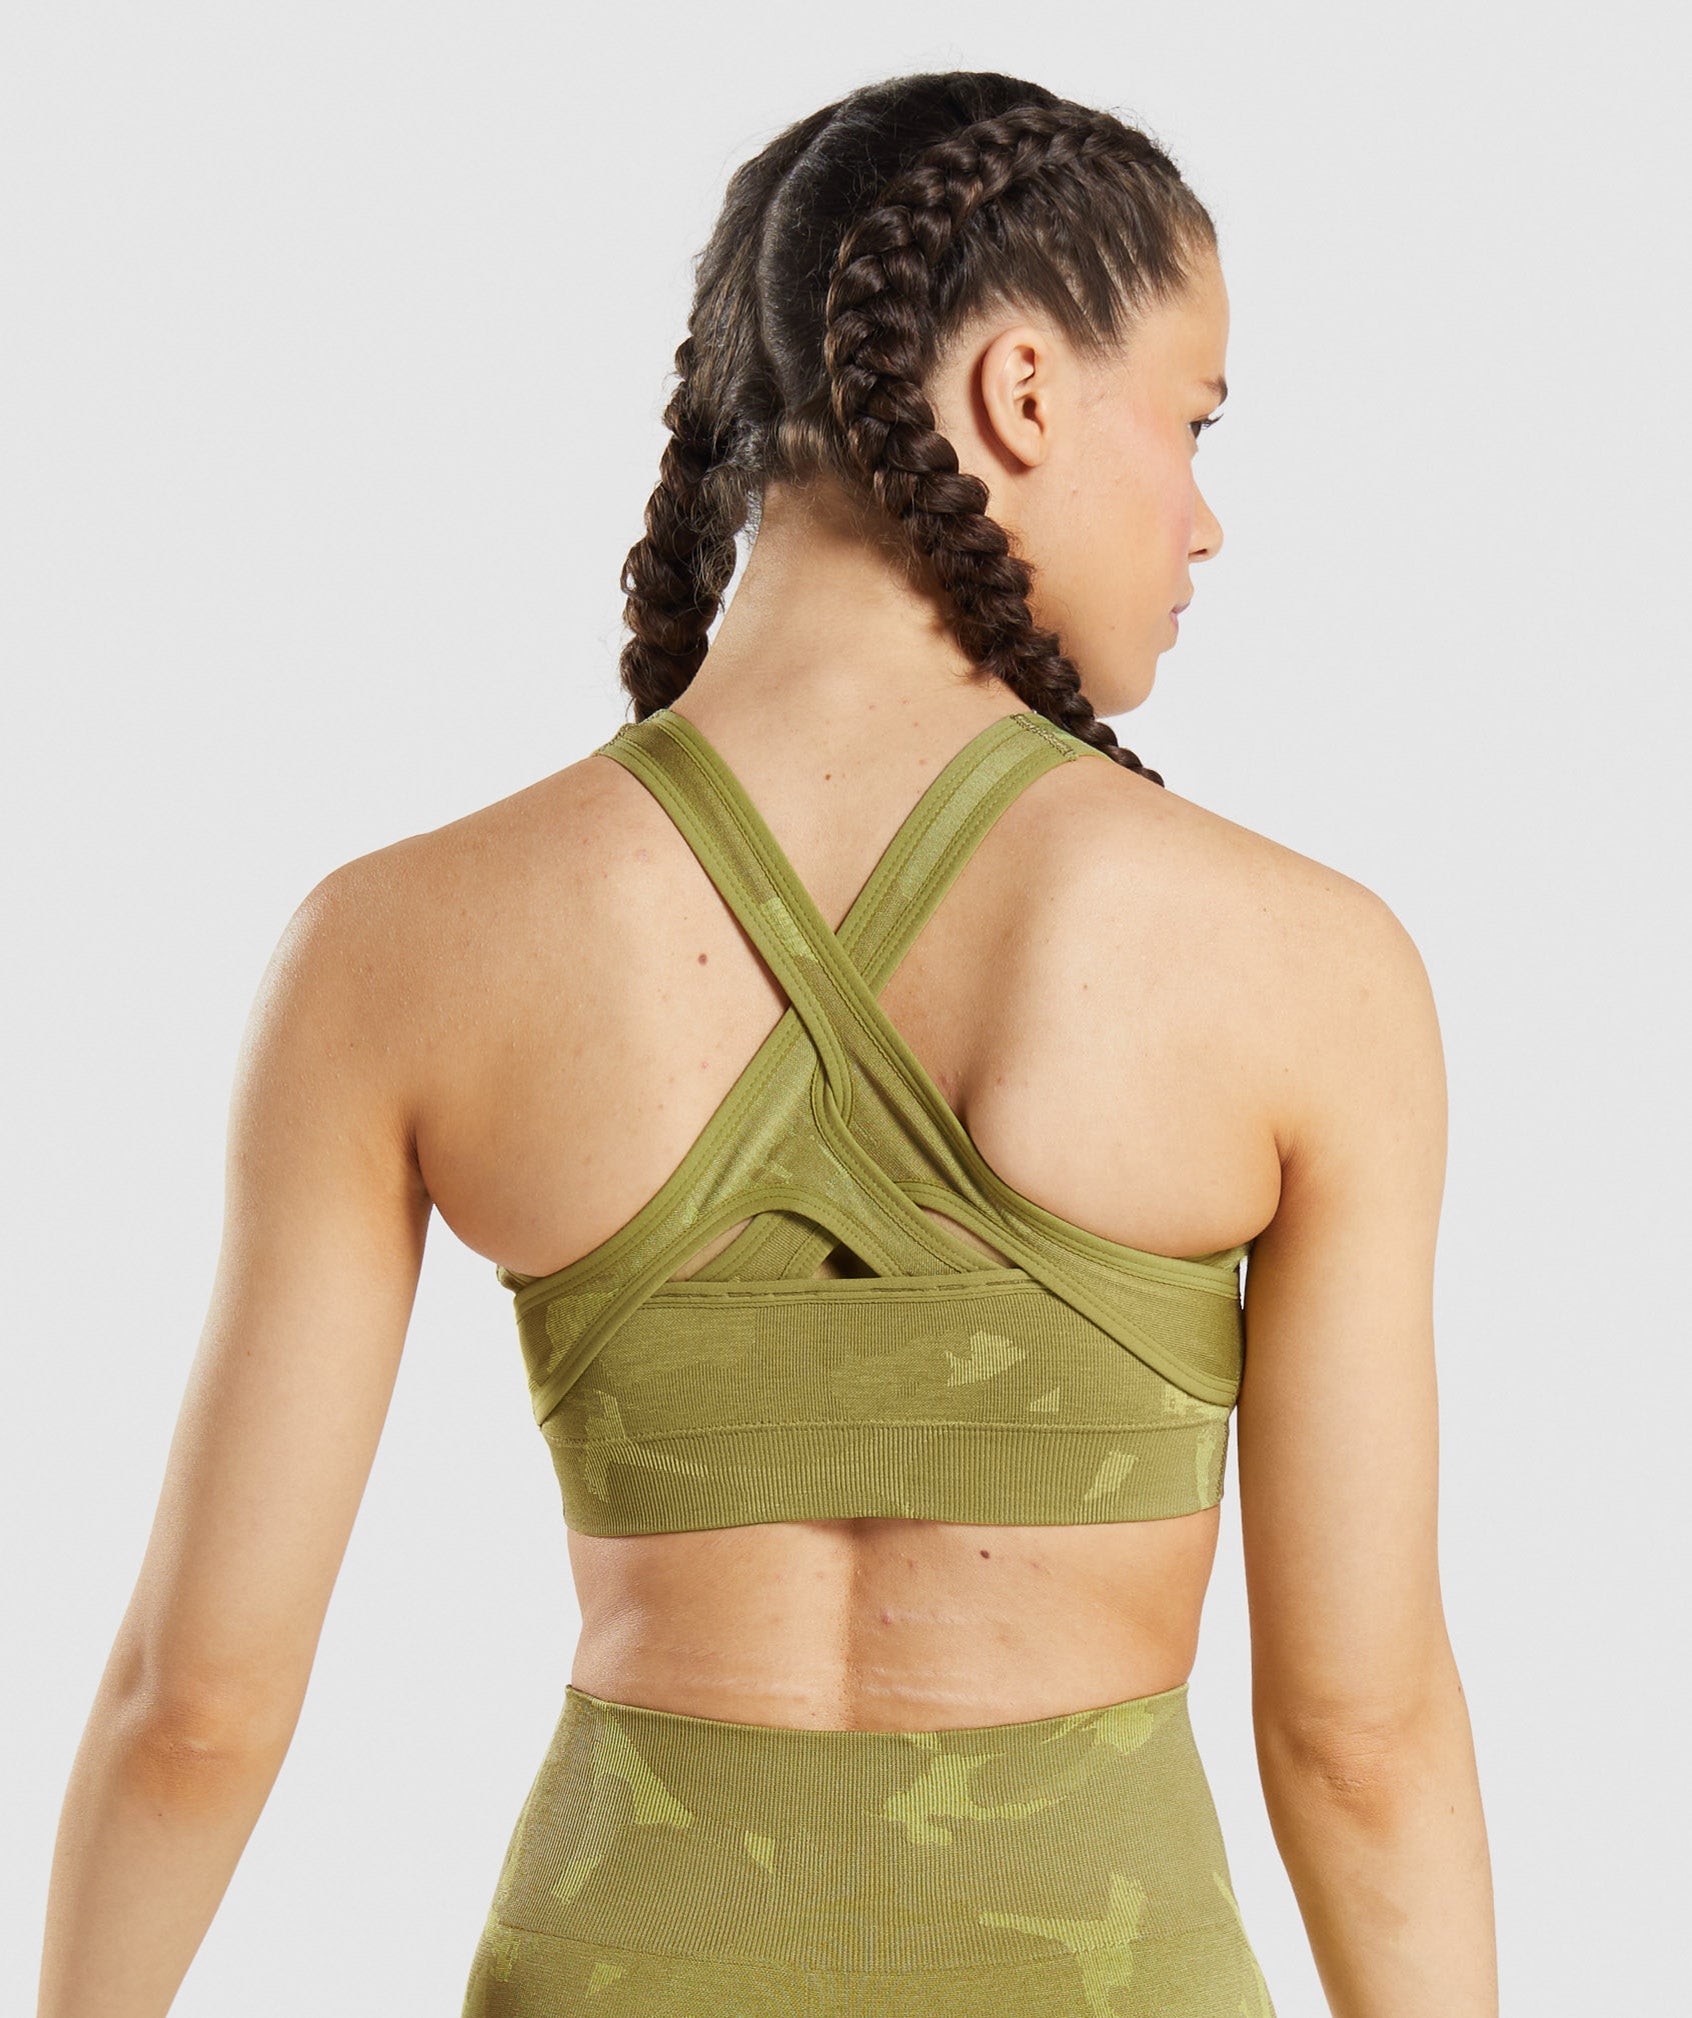 Gymshark Adapt Camo Seamless Leggings and Sports Bra Set Green - $72 (40%  Off Retail) - From Michelle